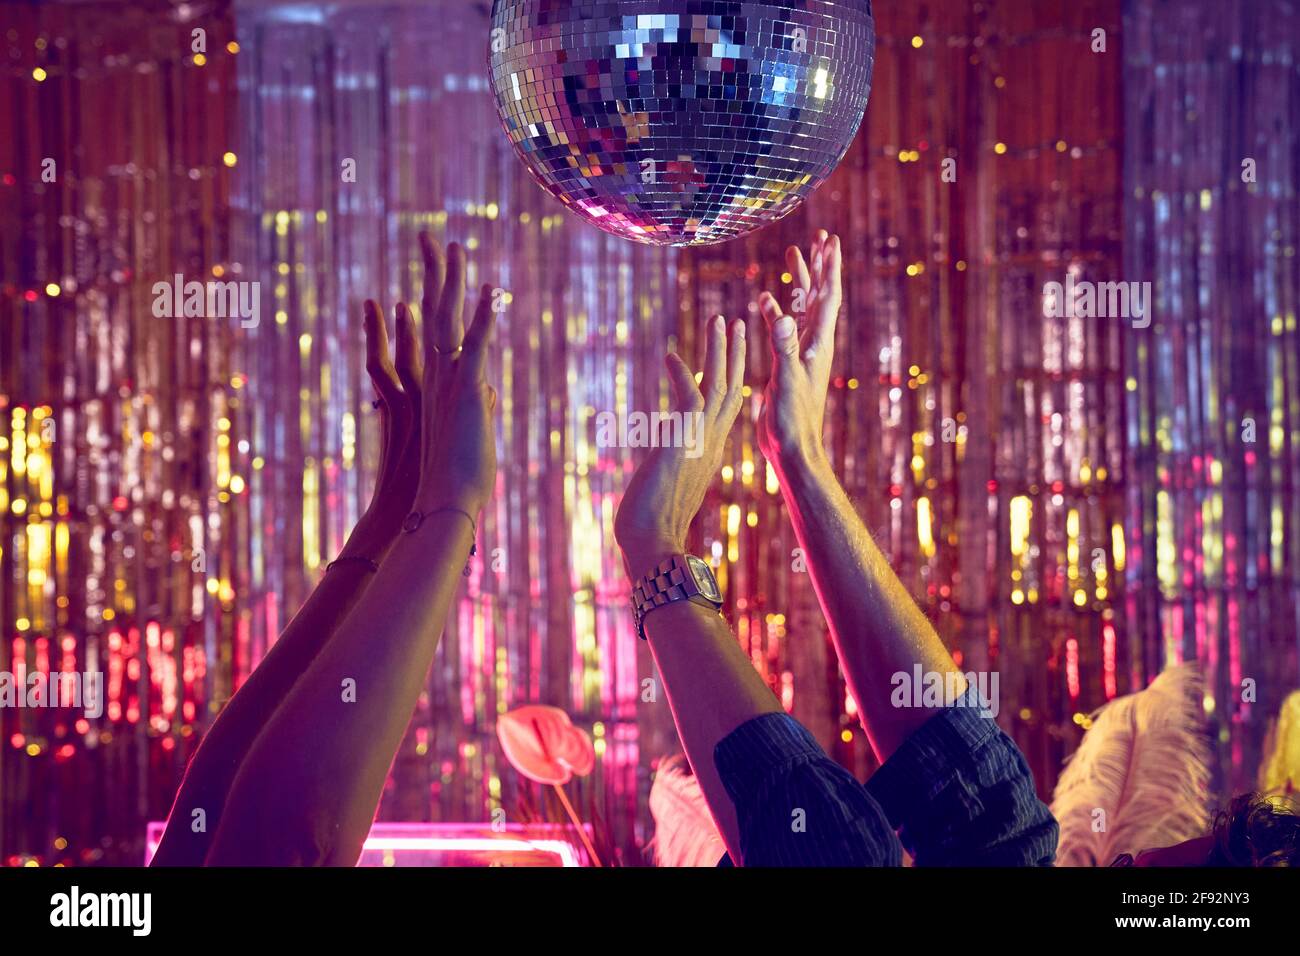 Disco dancing underneath the disco ball with hands in the air. Stock Photo